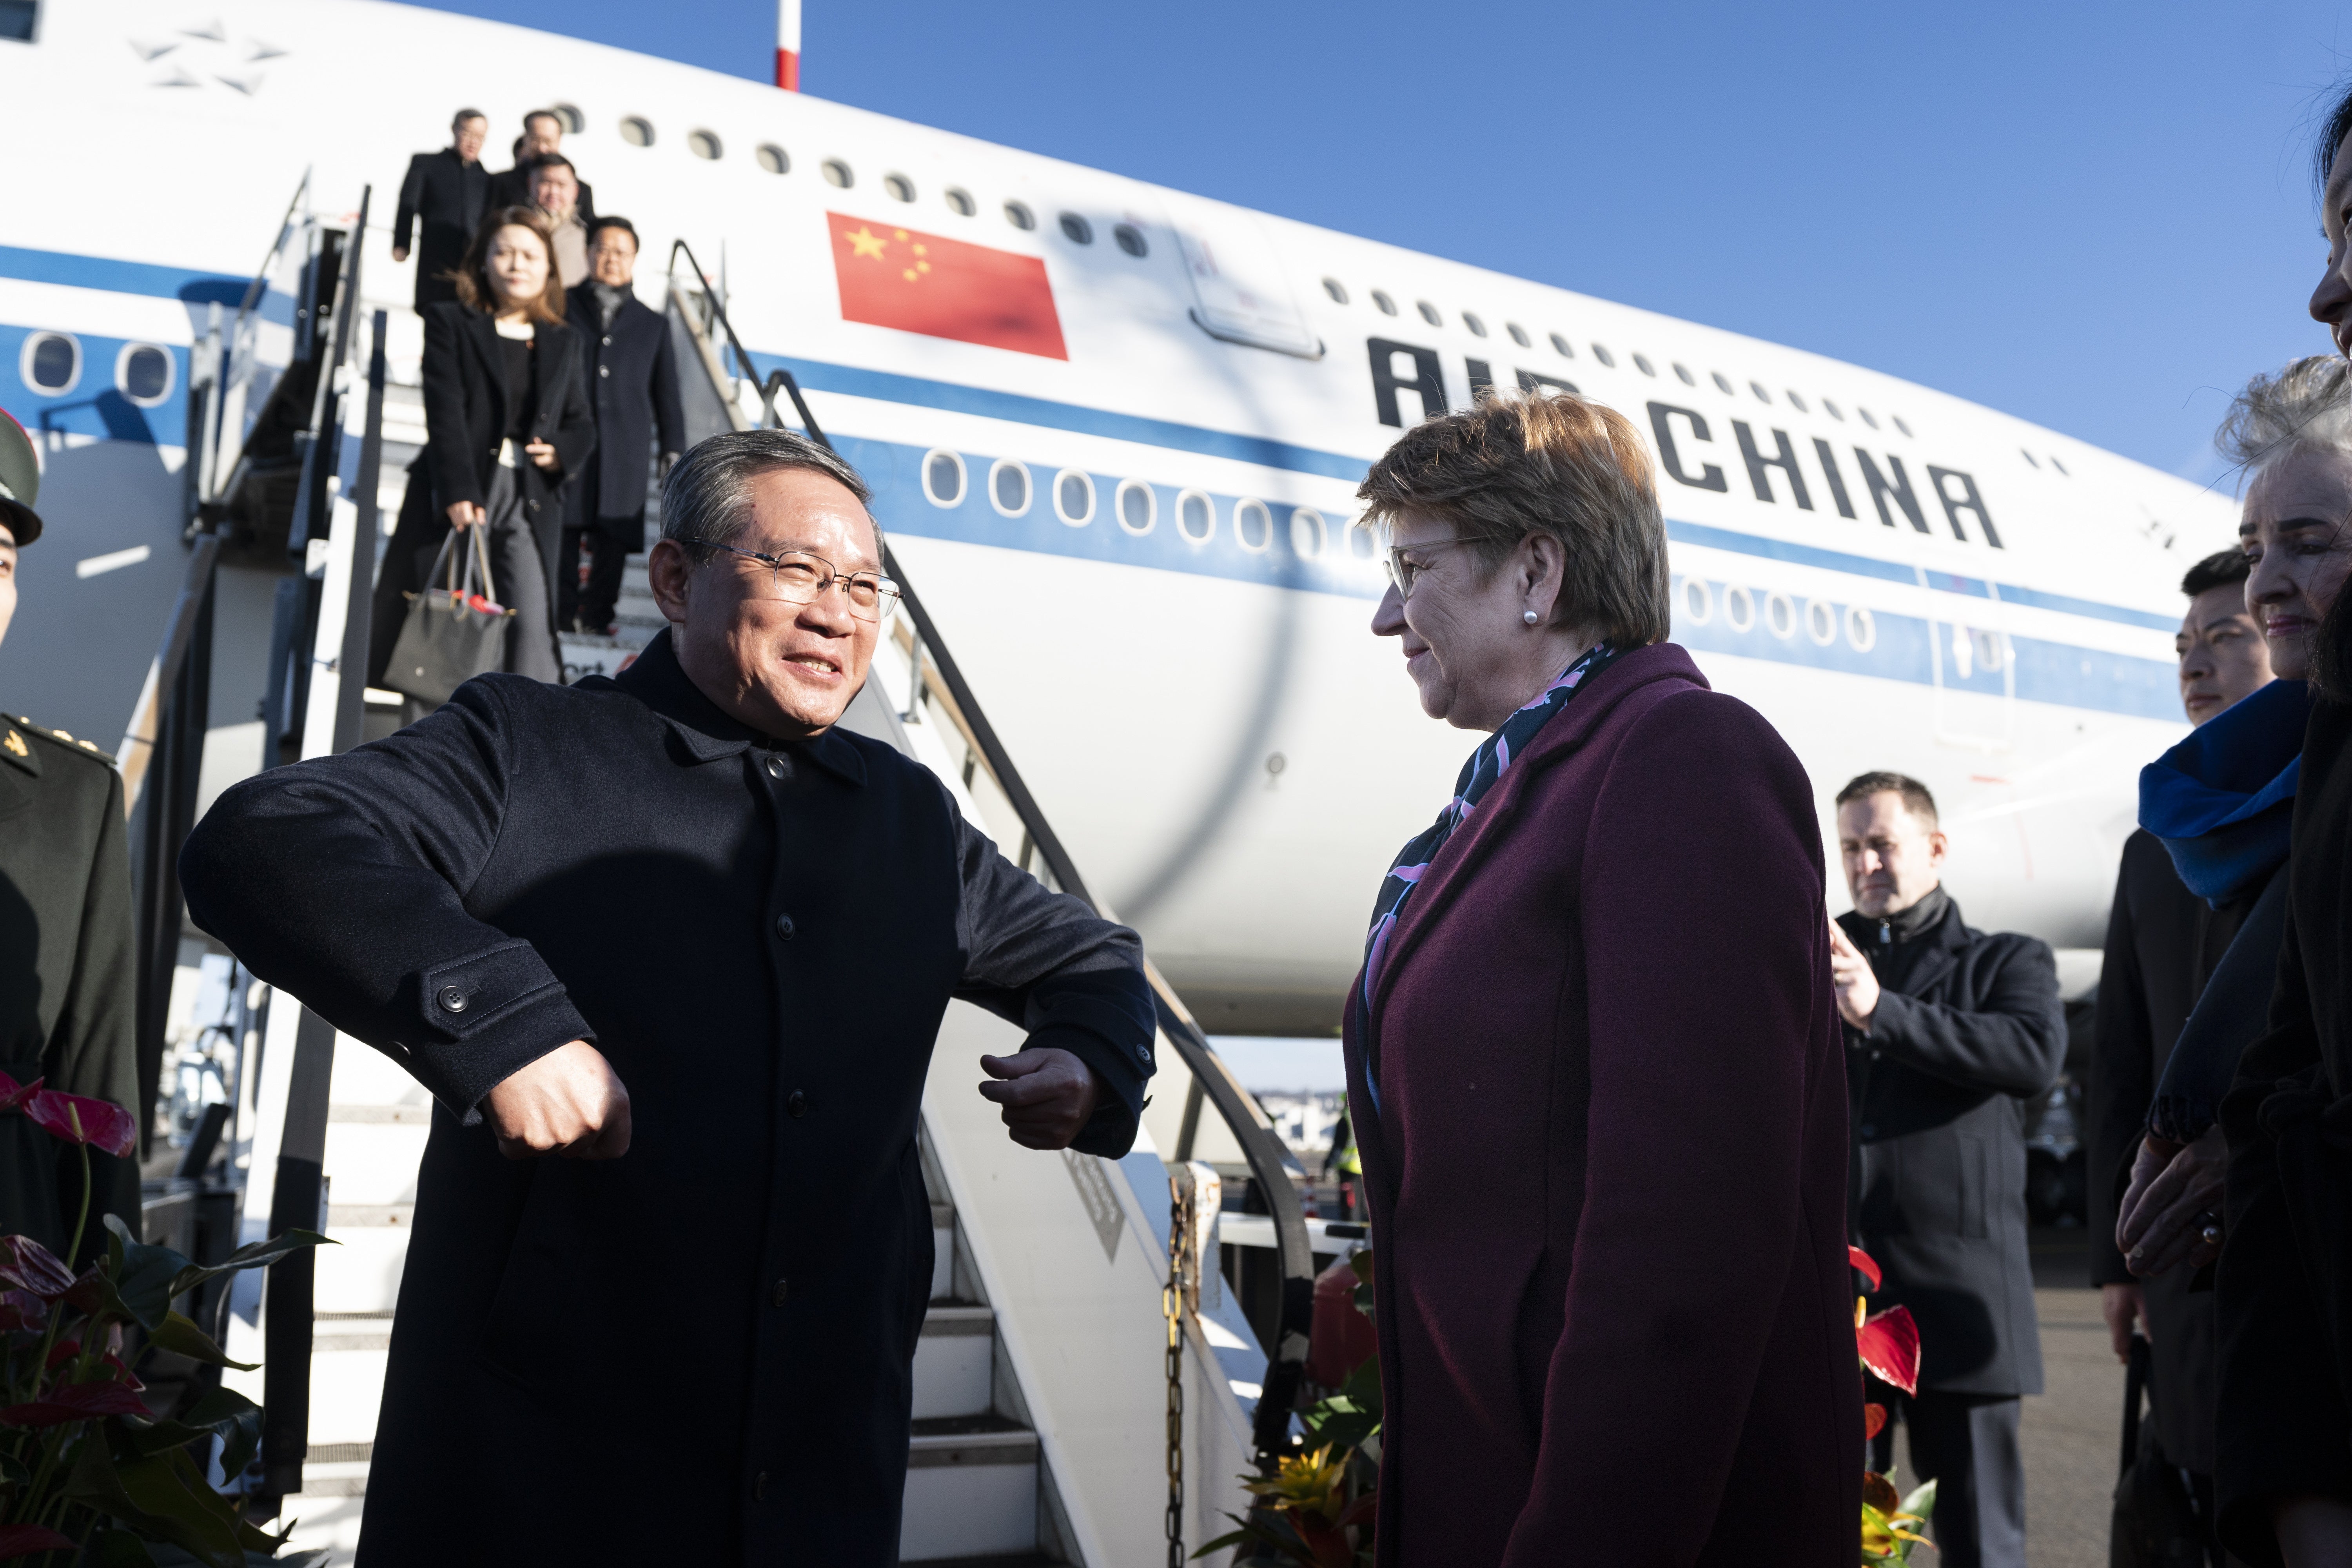 Swiss President Viola Amherd (R) welcomes Chinese Prime Minister Li Qiang (L) and his delegation upon their arrival at Zurich Airport